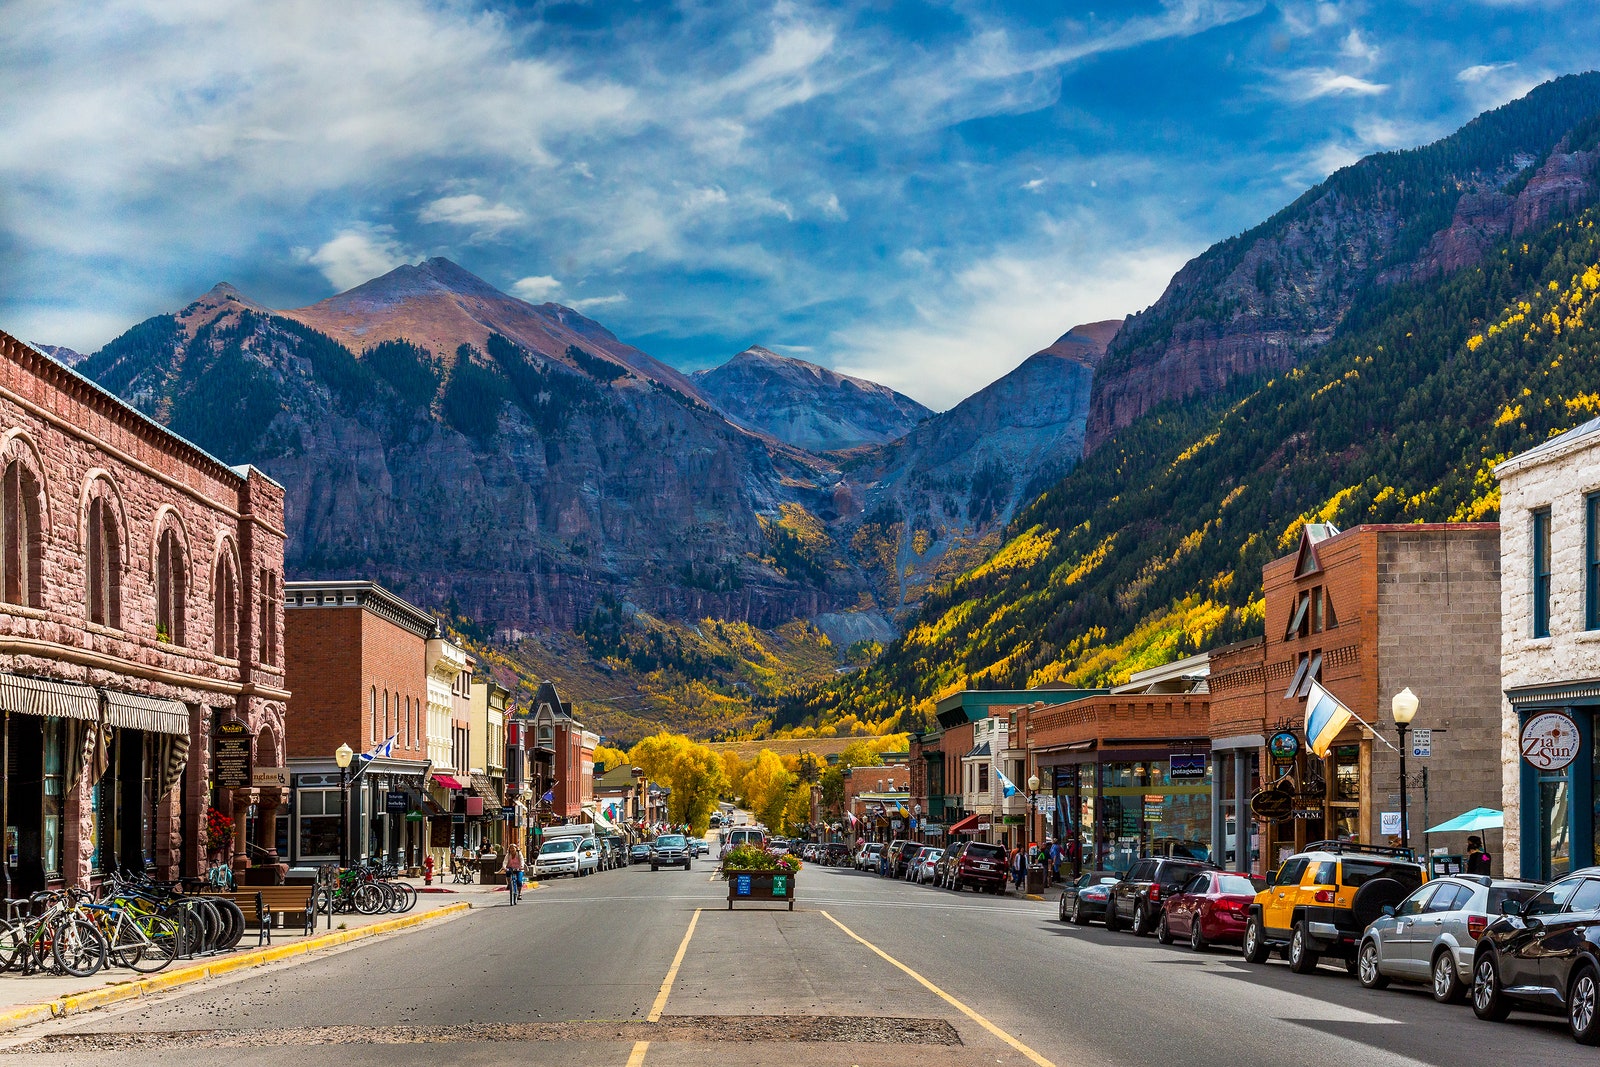 Telluride, Colorado / Foto: Photography by Deb Snelson / Getty Images.